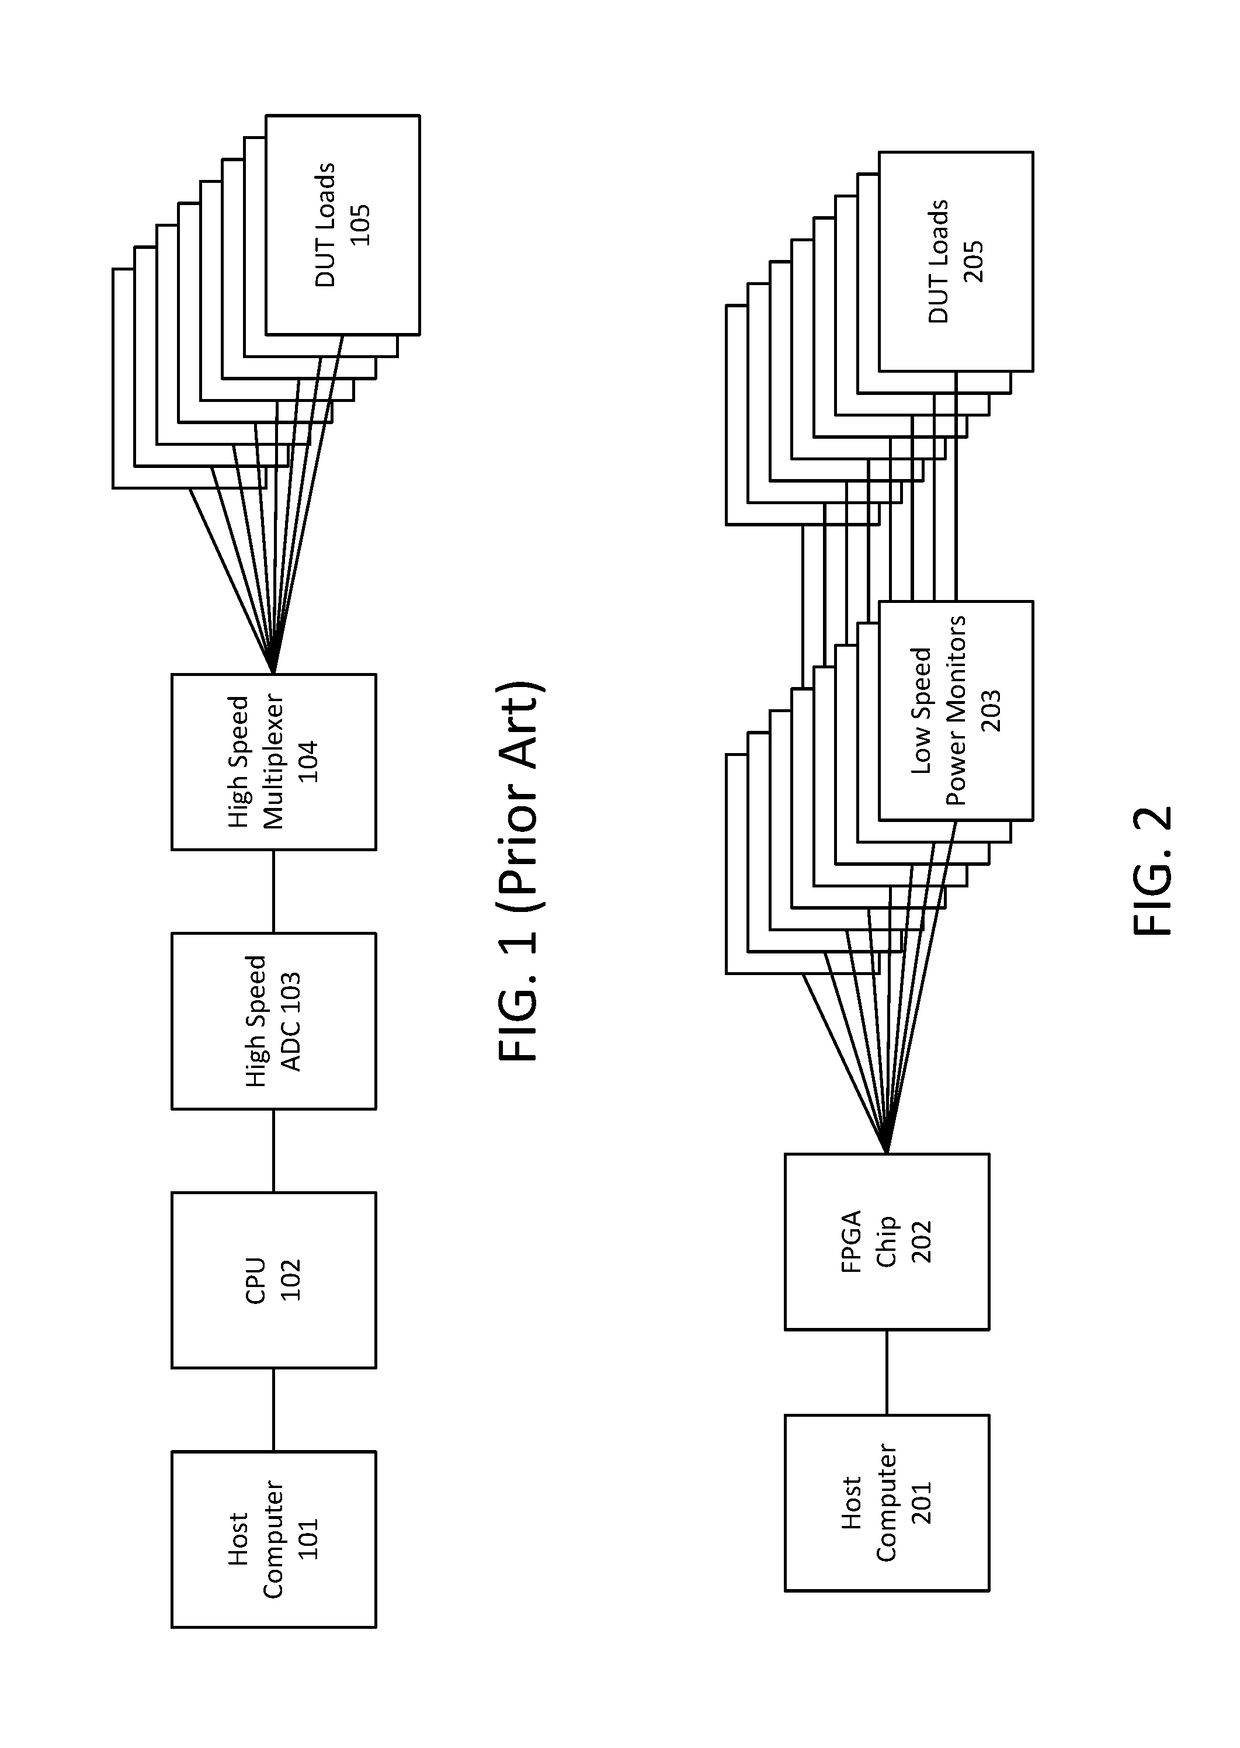 System and method for parallel power monitoring